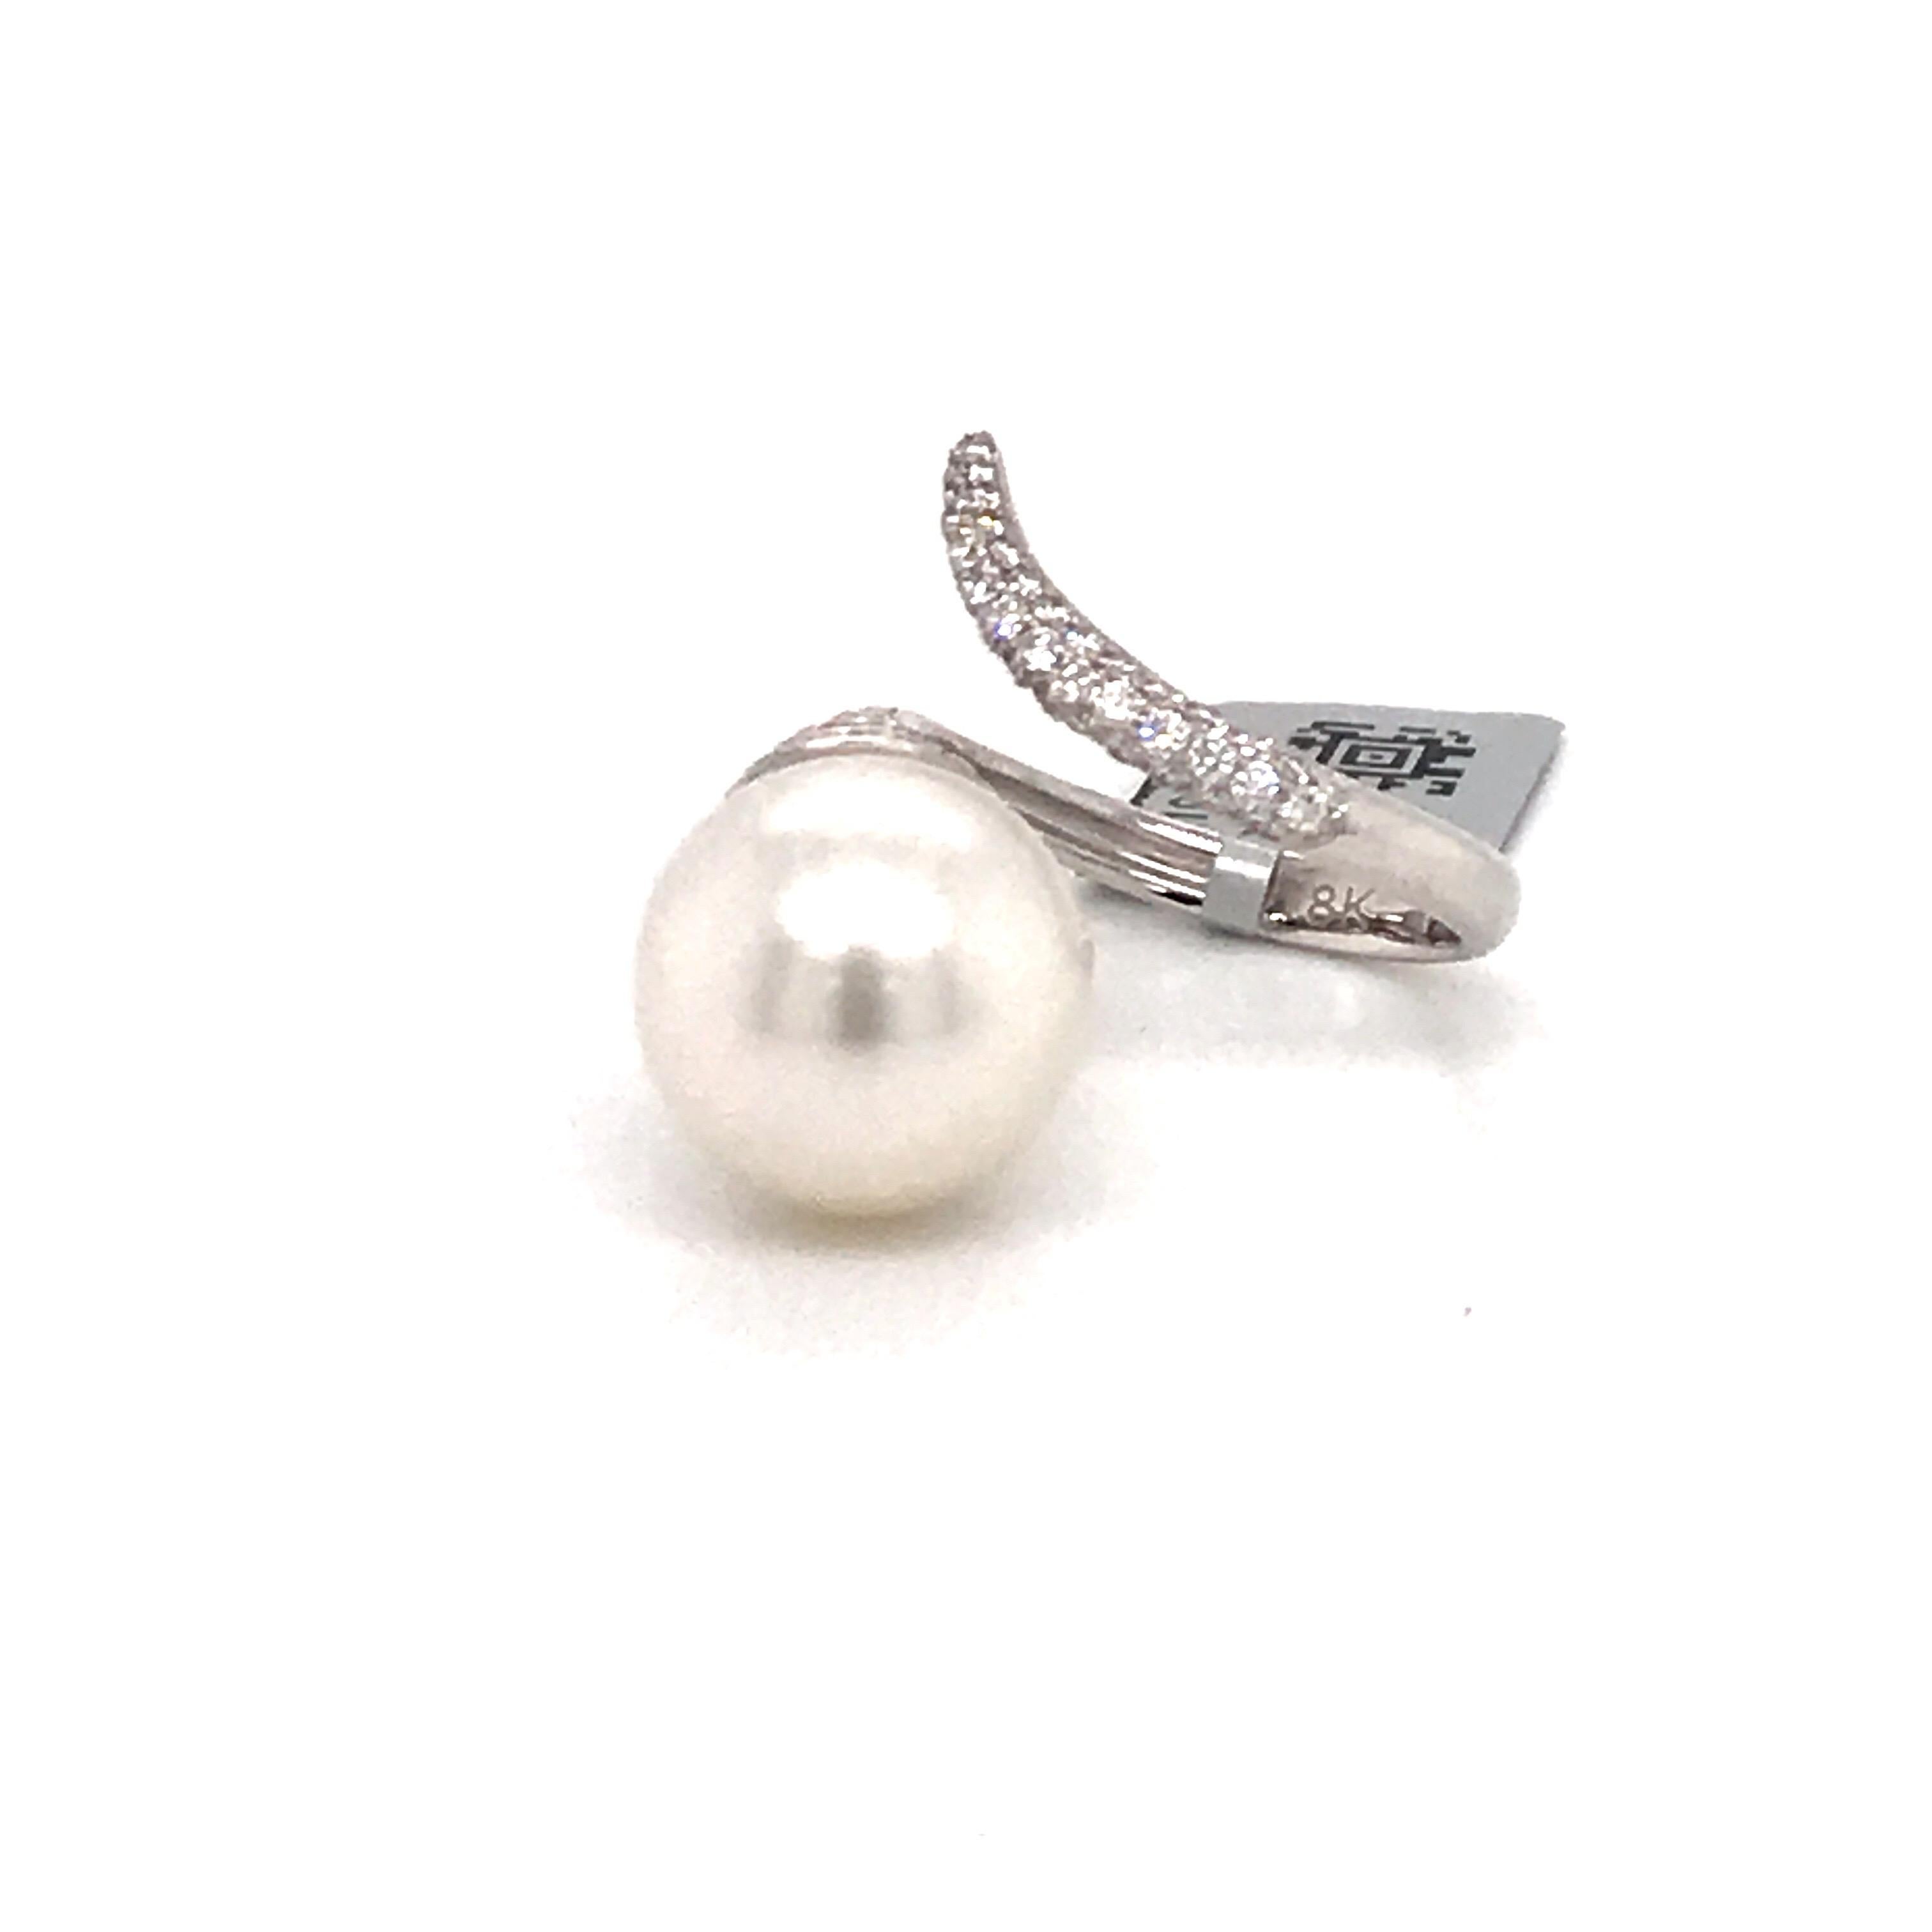 18K White gold ring featuring one South Sea Pearl measuring 13-14 MM flanked with 85 round brilliants weighing 0.79 carats. 
Color G-H
Clarity SI

Measurements:
South Sea Pearl: 13-14 MM
Nail Band: 2.8 MM

Ring can be sized.
Pearl can be changed to